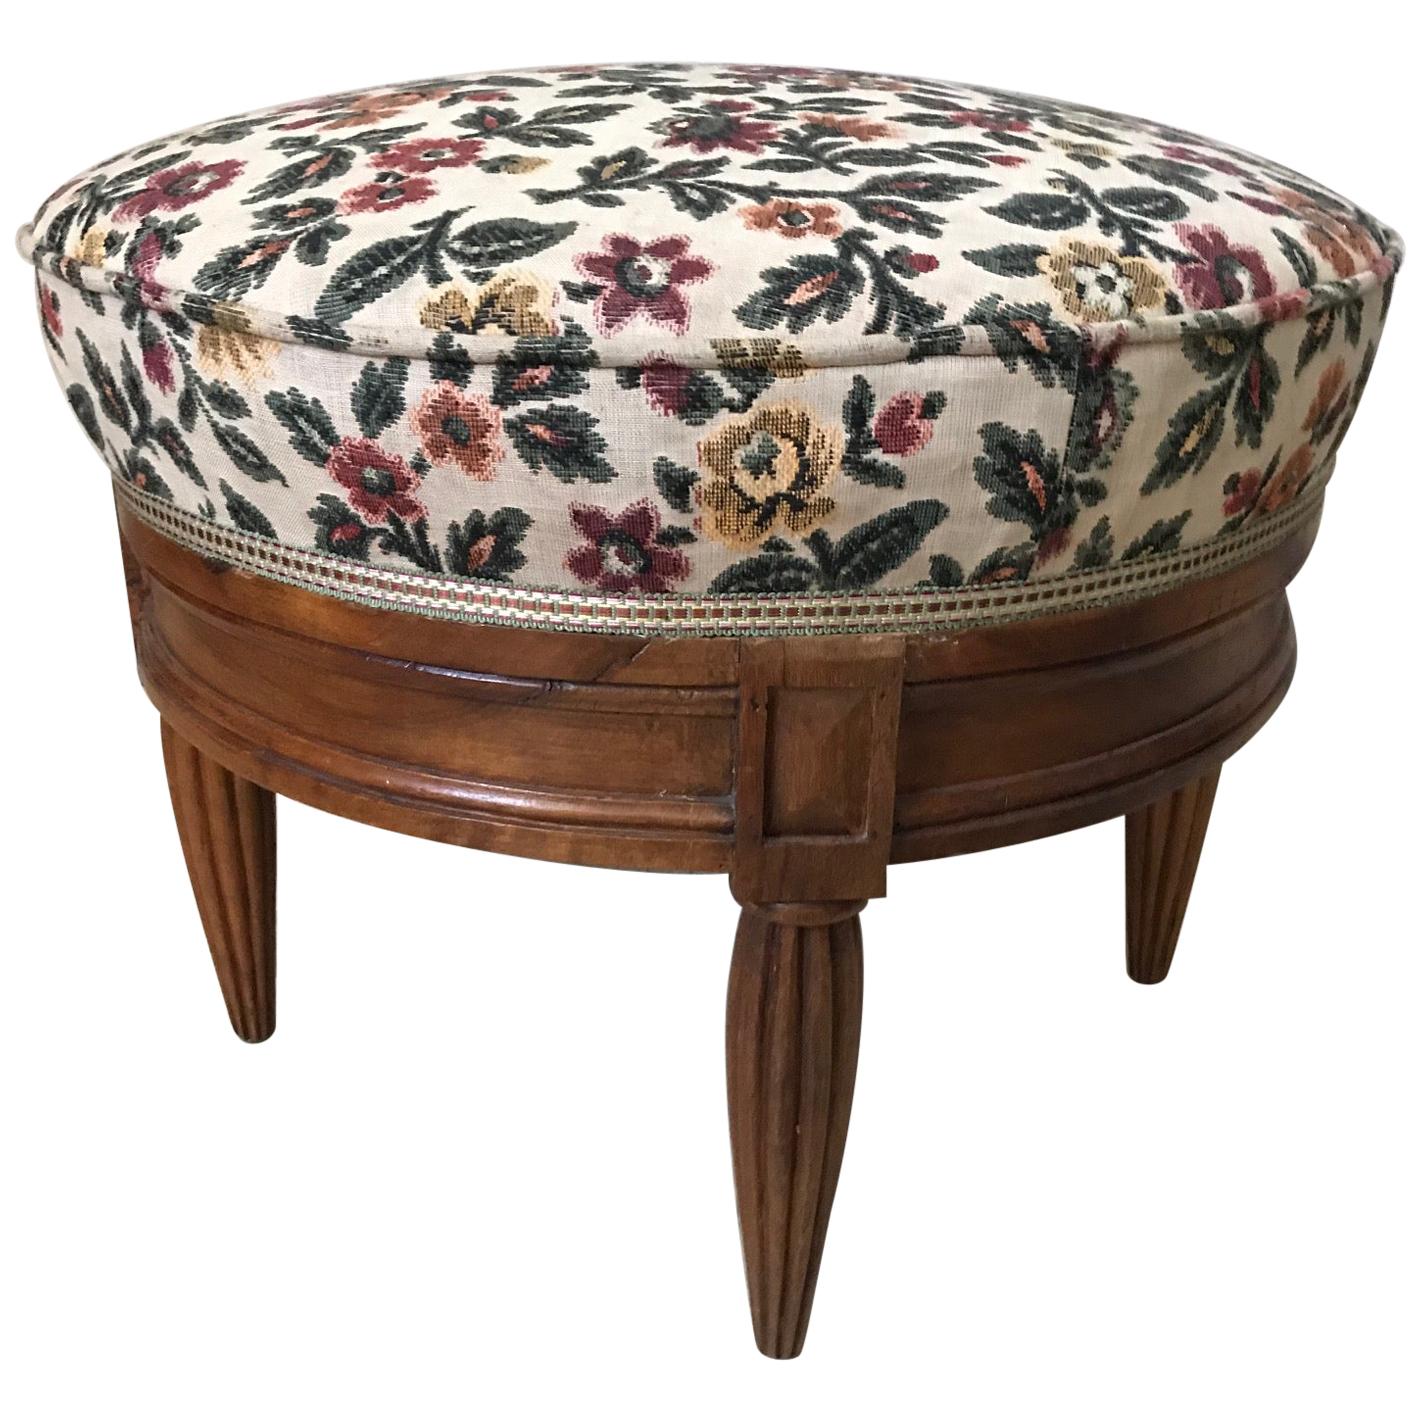 20th Century French Art Deco Footstool, 1930s